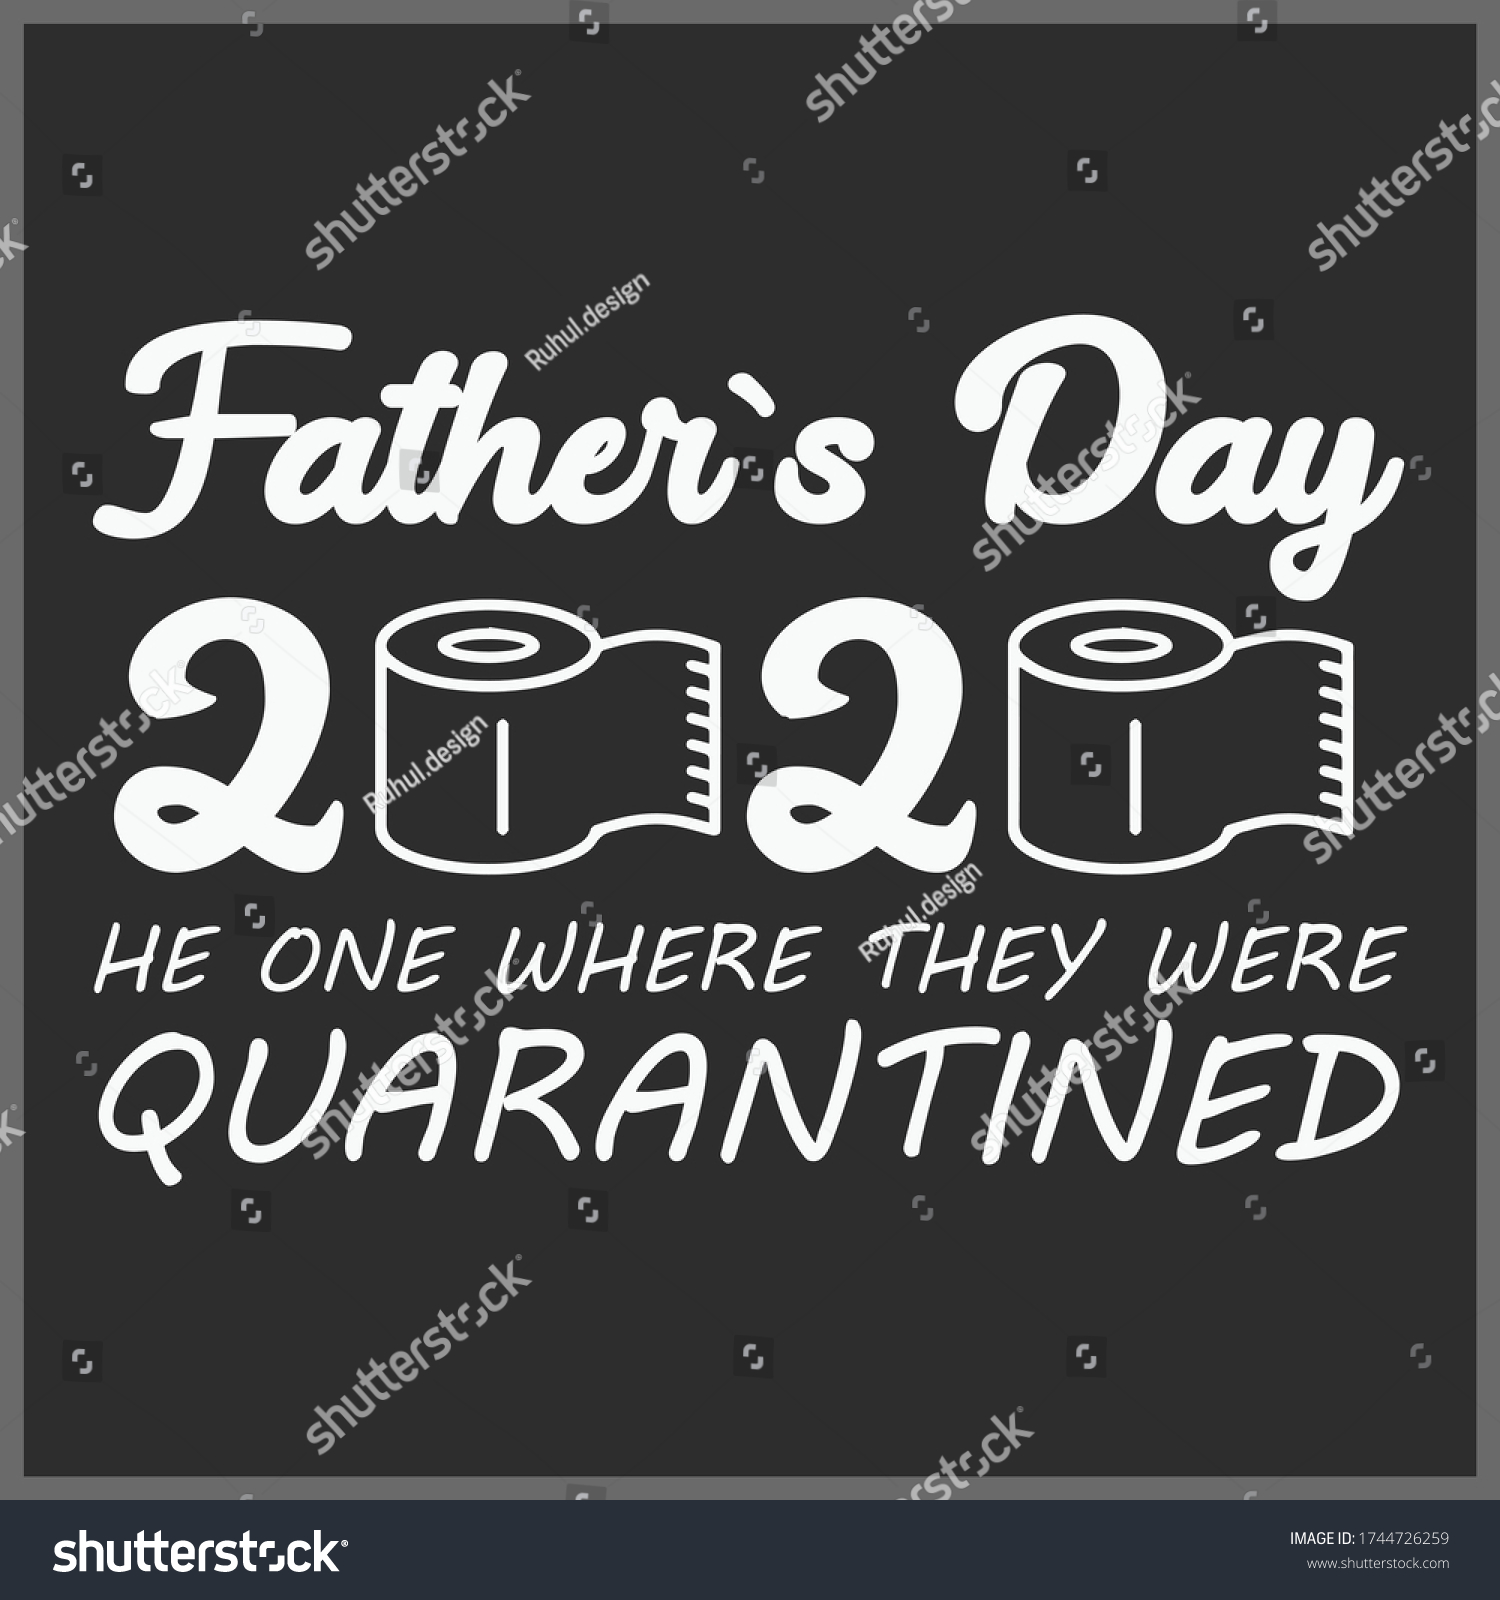 SVG of Fathers Day 2020 The One Where They Were Quarantined - Fathers Day 2020 Quarantined - Fathers Day 2020 T-Shirt, COVID 19 SVG t-shirt design   svg